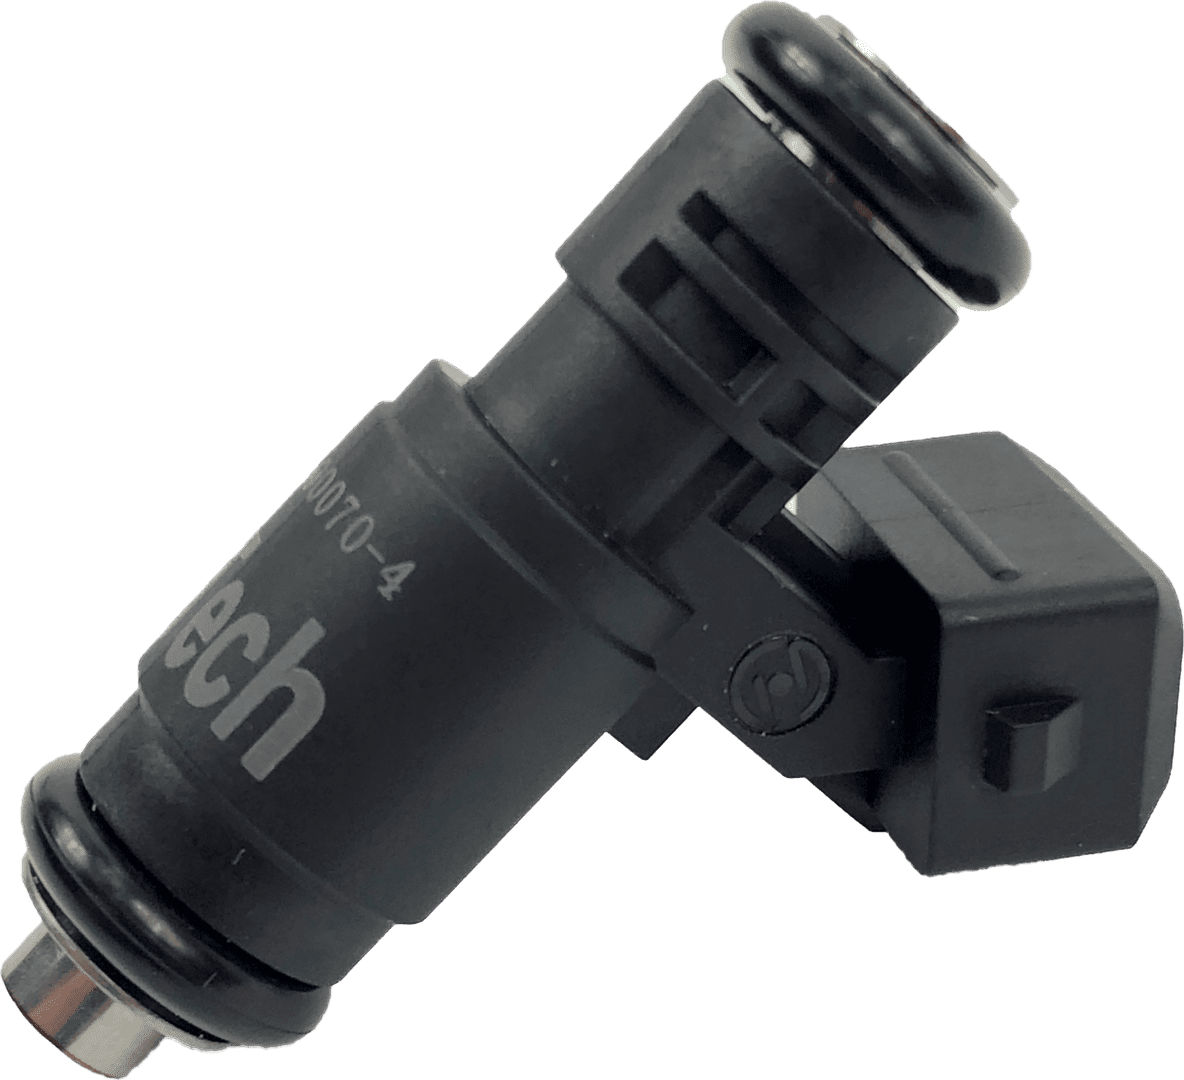 FiTech 10062 Go Fuel Series Replacement Electronic Fuel Injector (62-lb, individual)